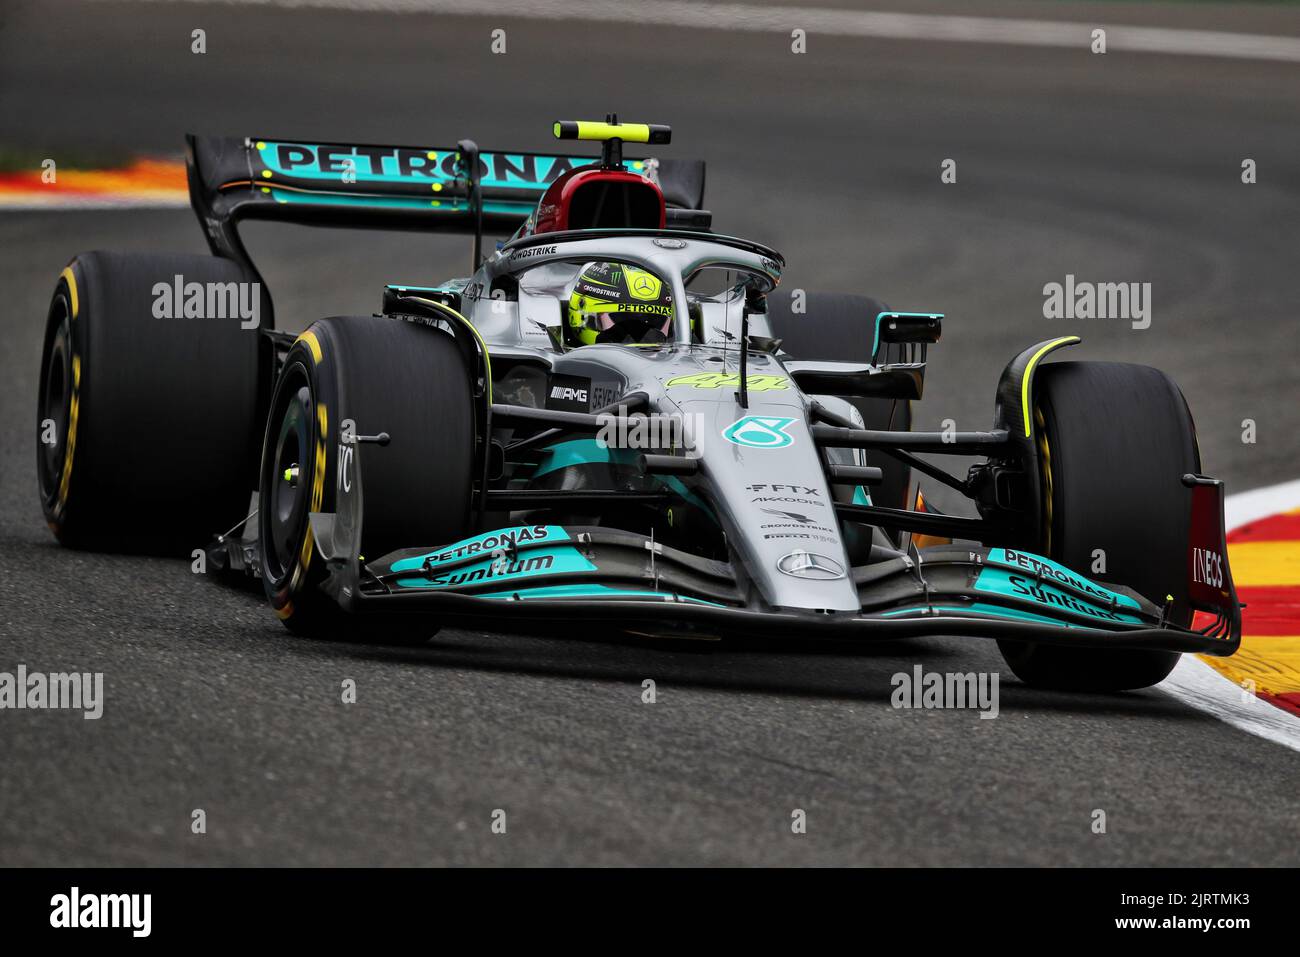 Spa Francorchamps, Belgium. 26th Aug, 2022. Lewis Hamilton (GBR) Mercedes AMG F1 W13. Belgian Grand Prix, Friday 26th August 2022